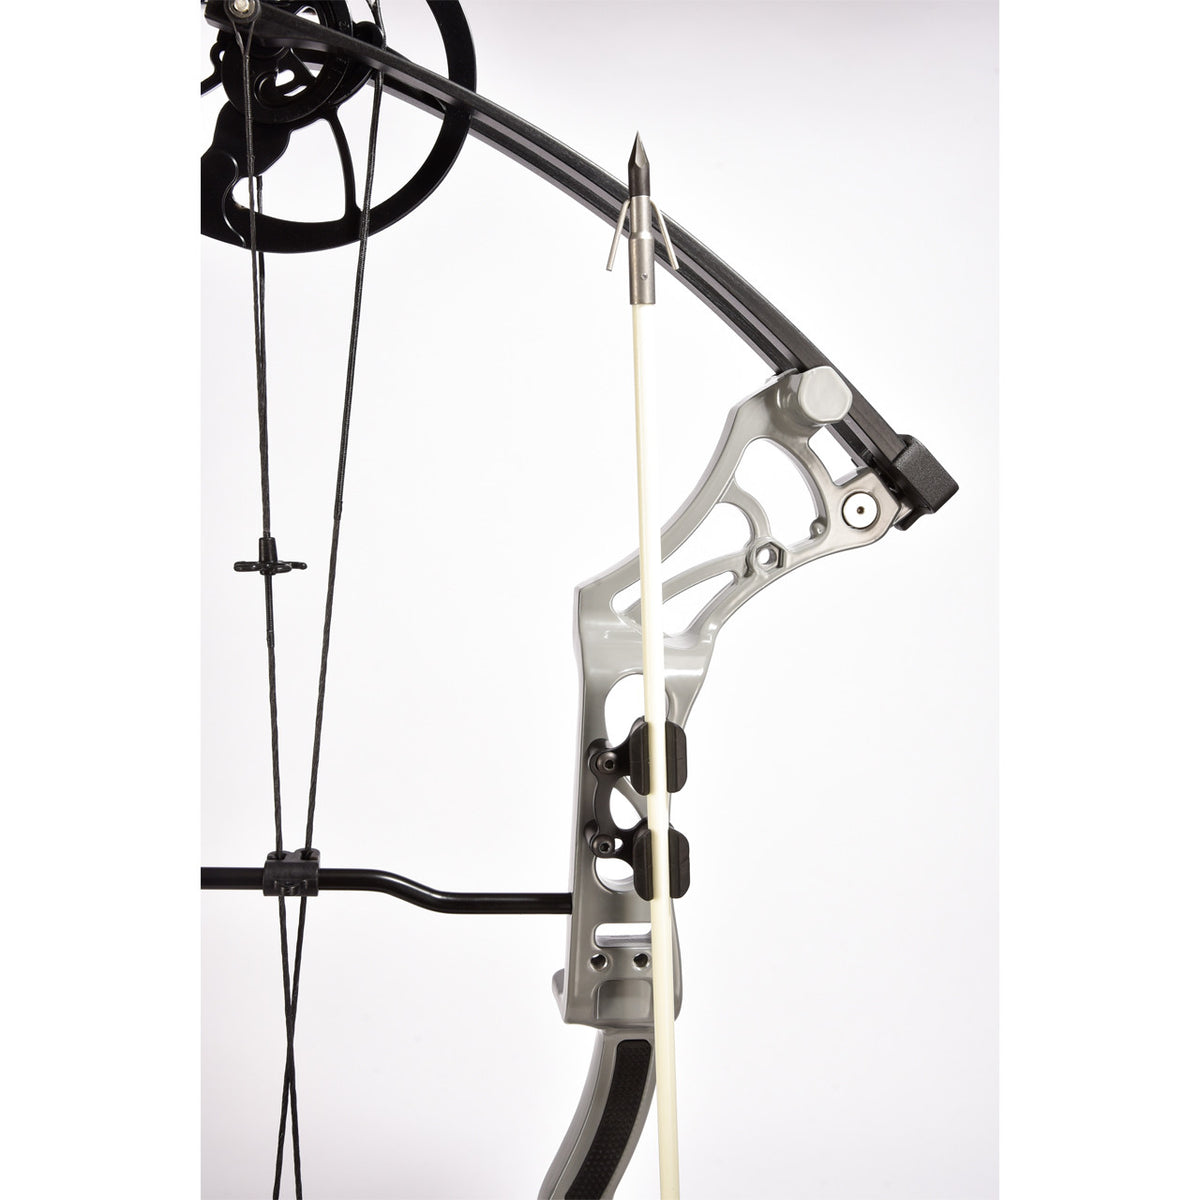 The Muzzy Mantis II Bow fishing Arrow Rest features a full